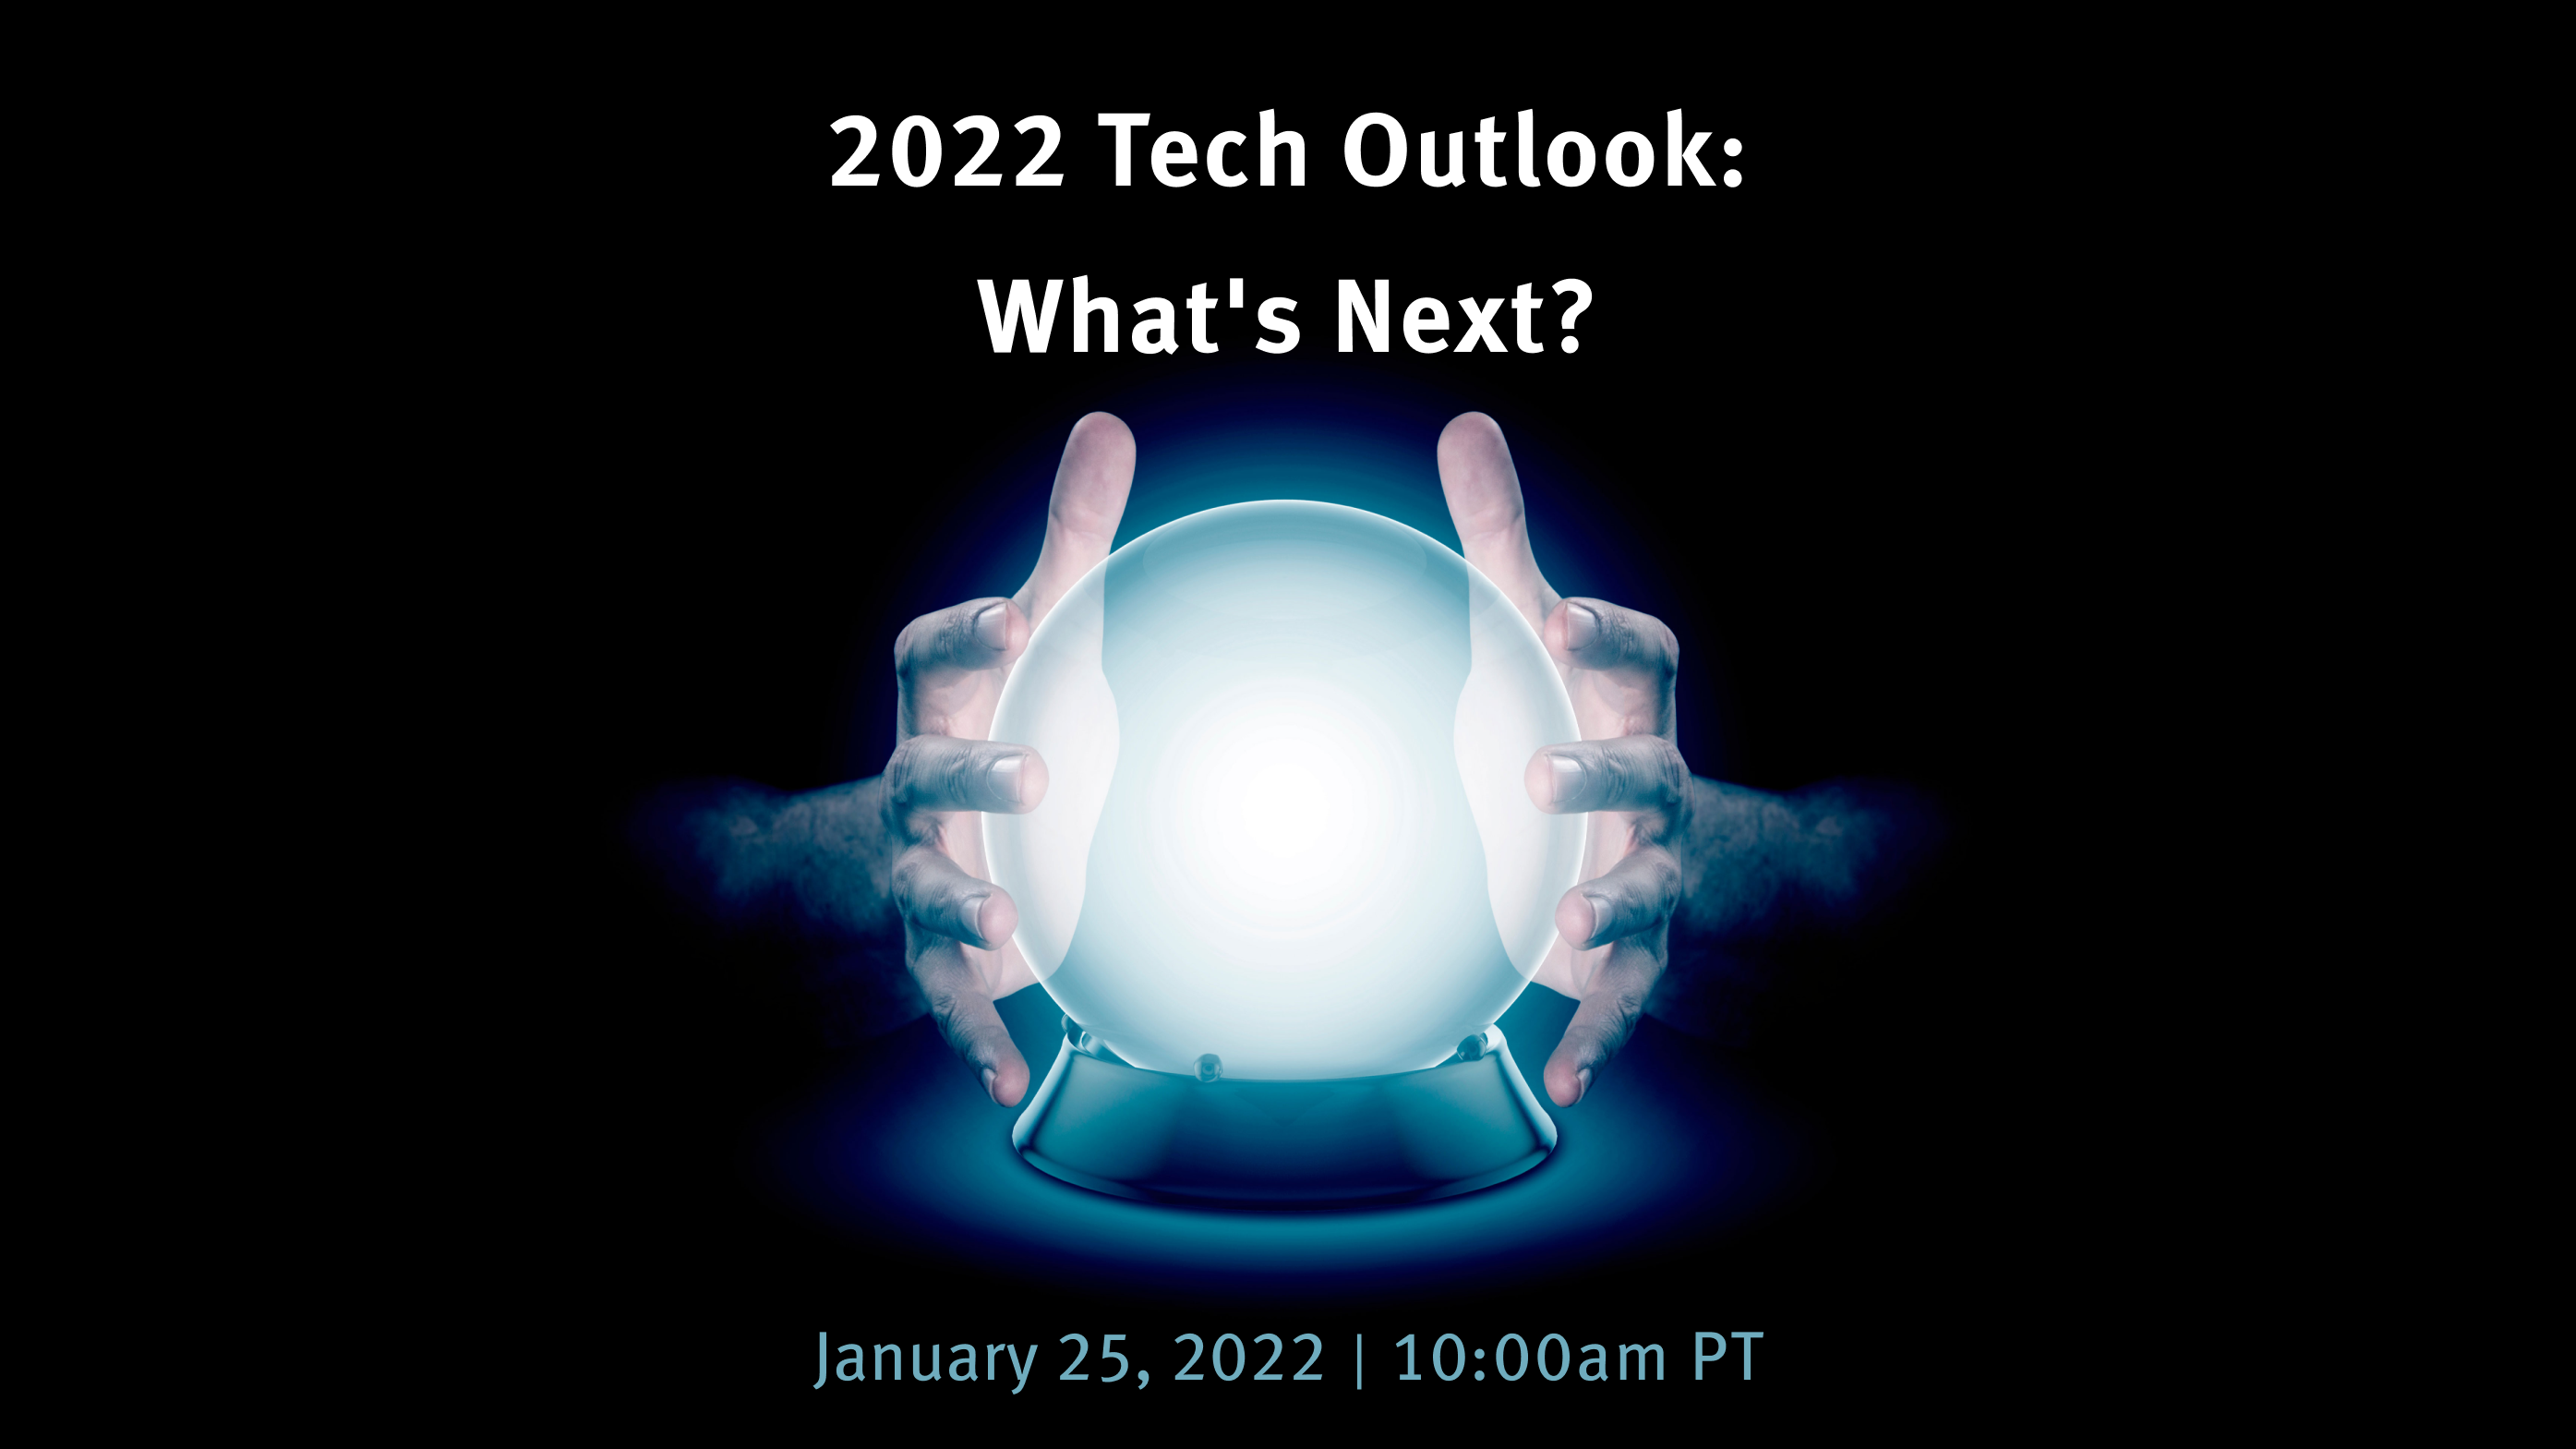 2022 Tech Outlook: What's Next?